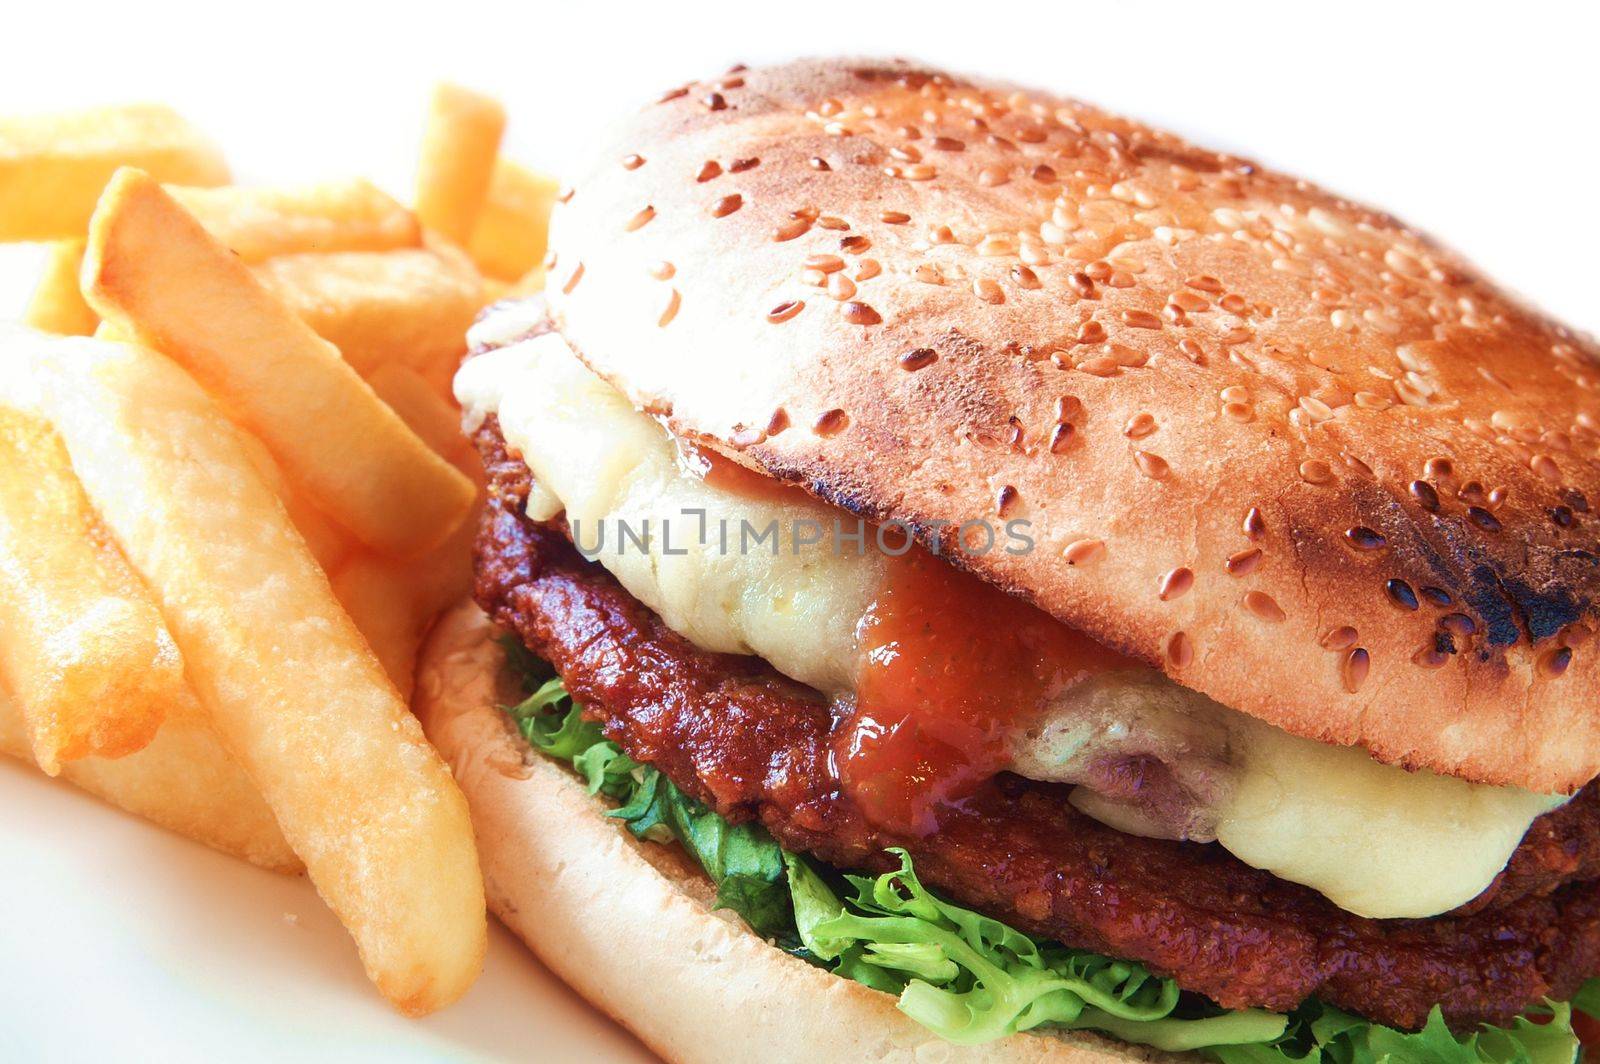 burger in bun with fries